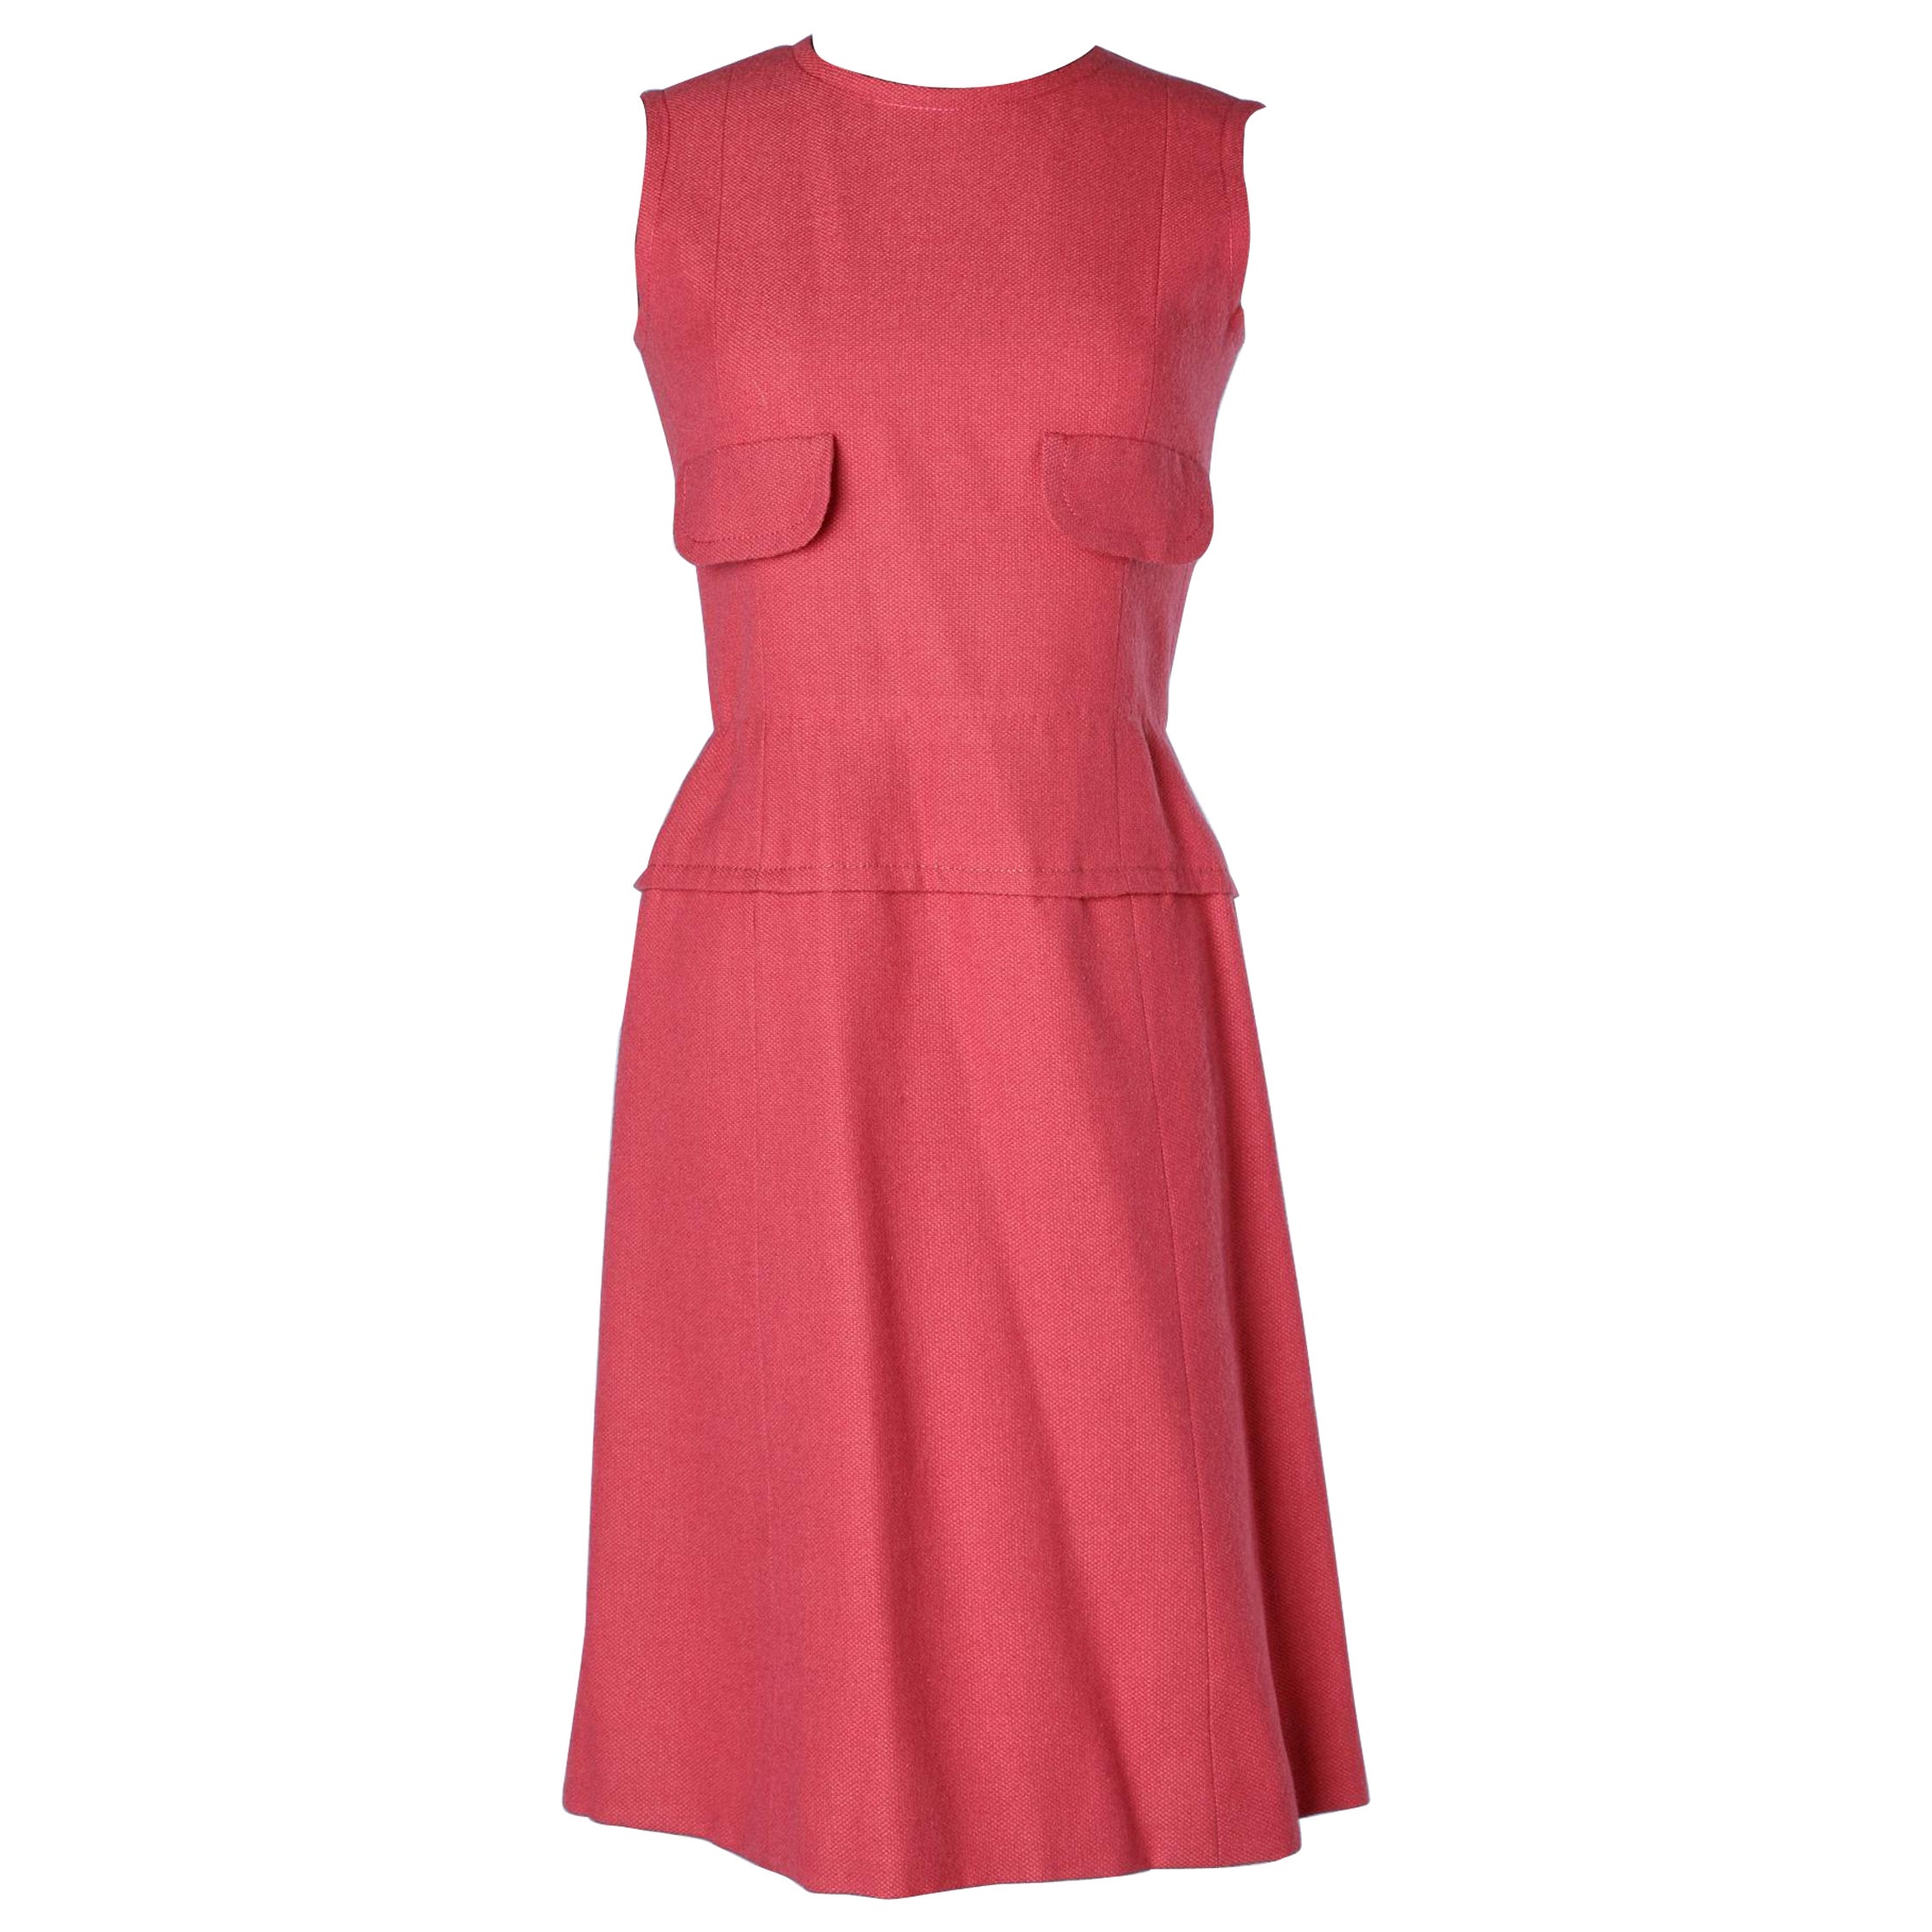 Sleeveless pink wool cocktail dress Guy Laroche Circa 1960's  For Sale